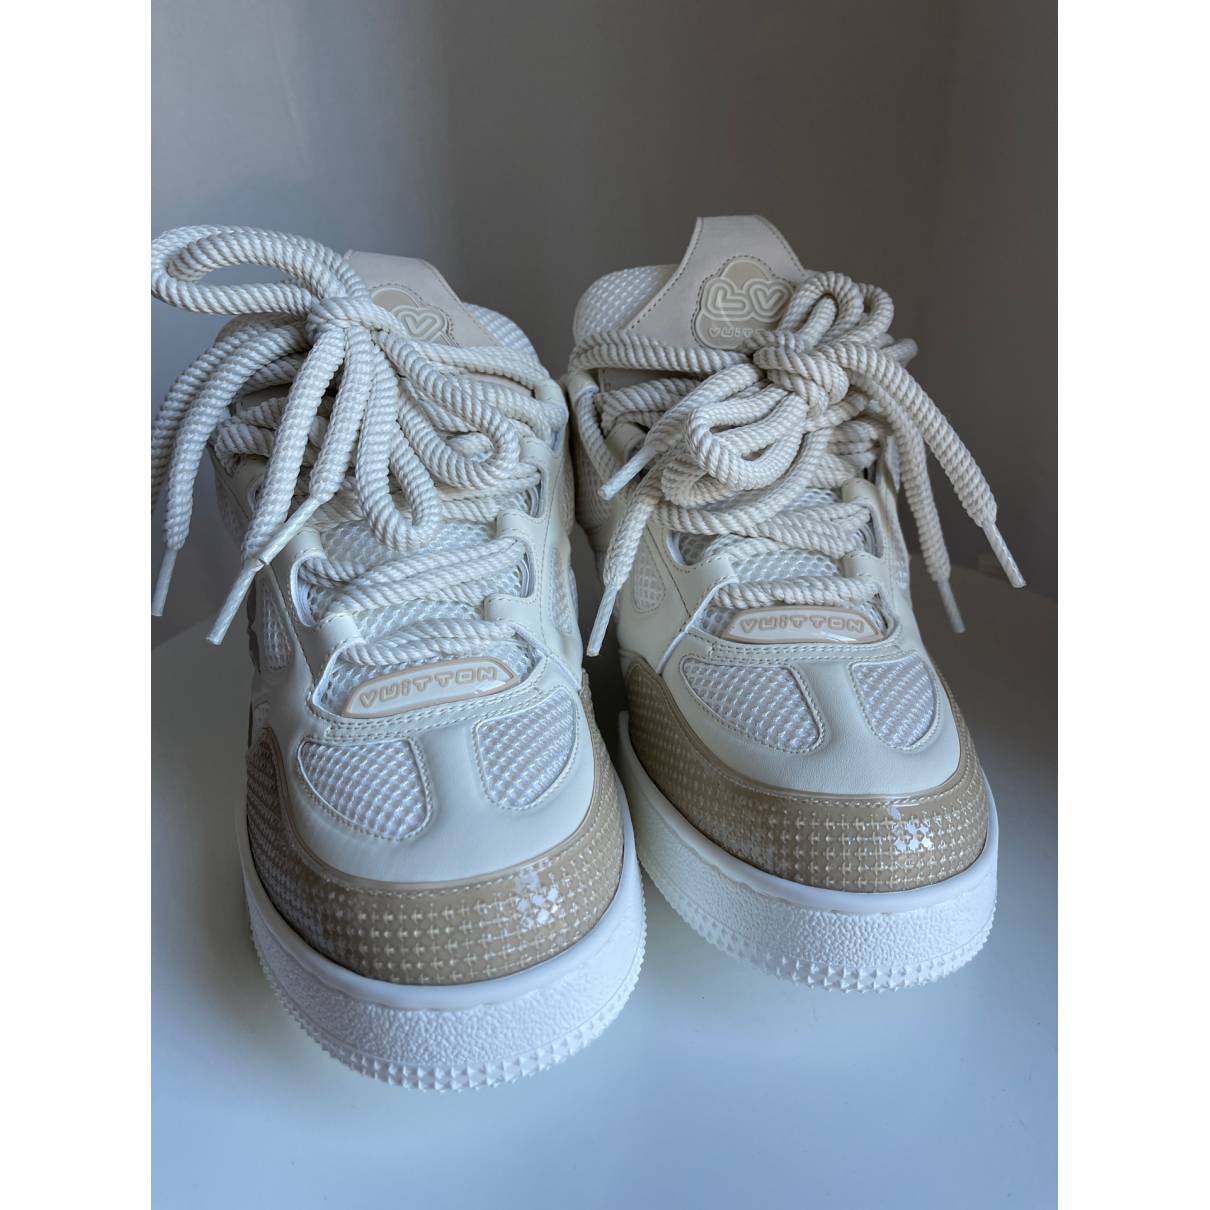 Lv trainer low trainers Louis Vuitton Grey size 6.5 UK in Polyester -  22540220